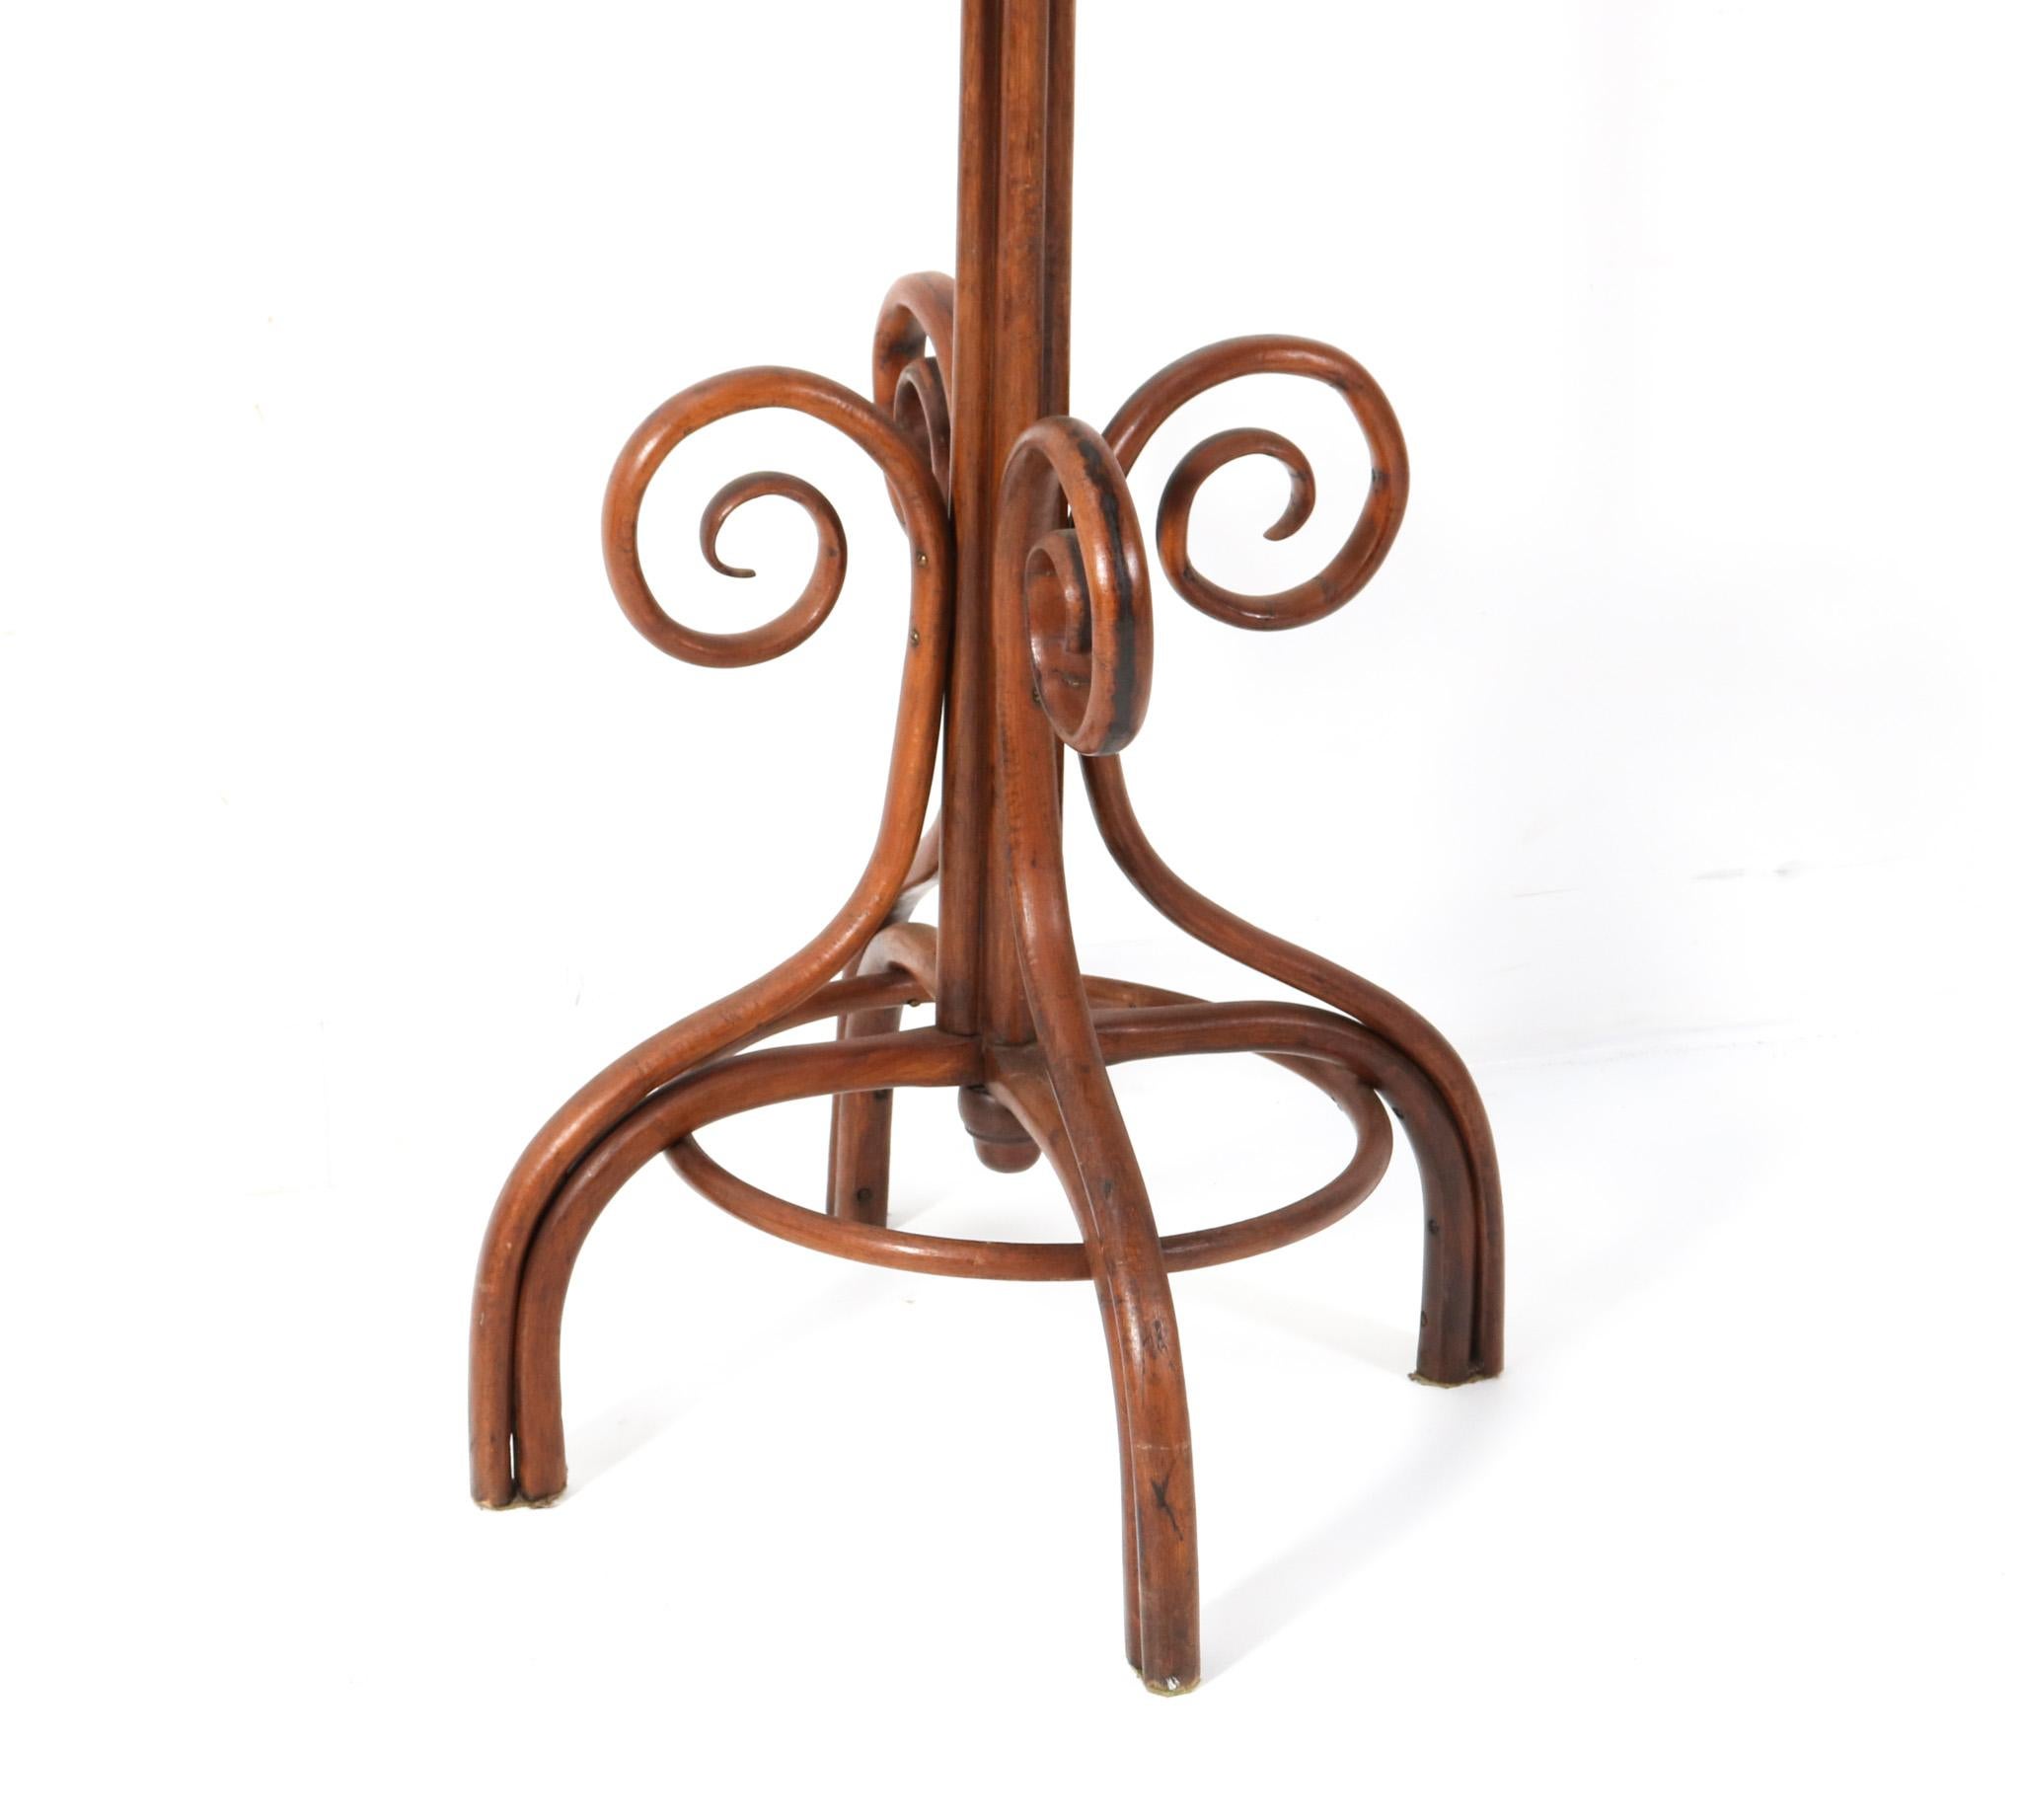 Stunning and elegant Art Nouveau hat and coat stand.
Design in the style of Thonet and Jacob and Josef Kohn.
Striking French design from the 1900s.
Stained beech and bentwood frame with hat rack and integrated umbrella stand.
This wonderful Art